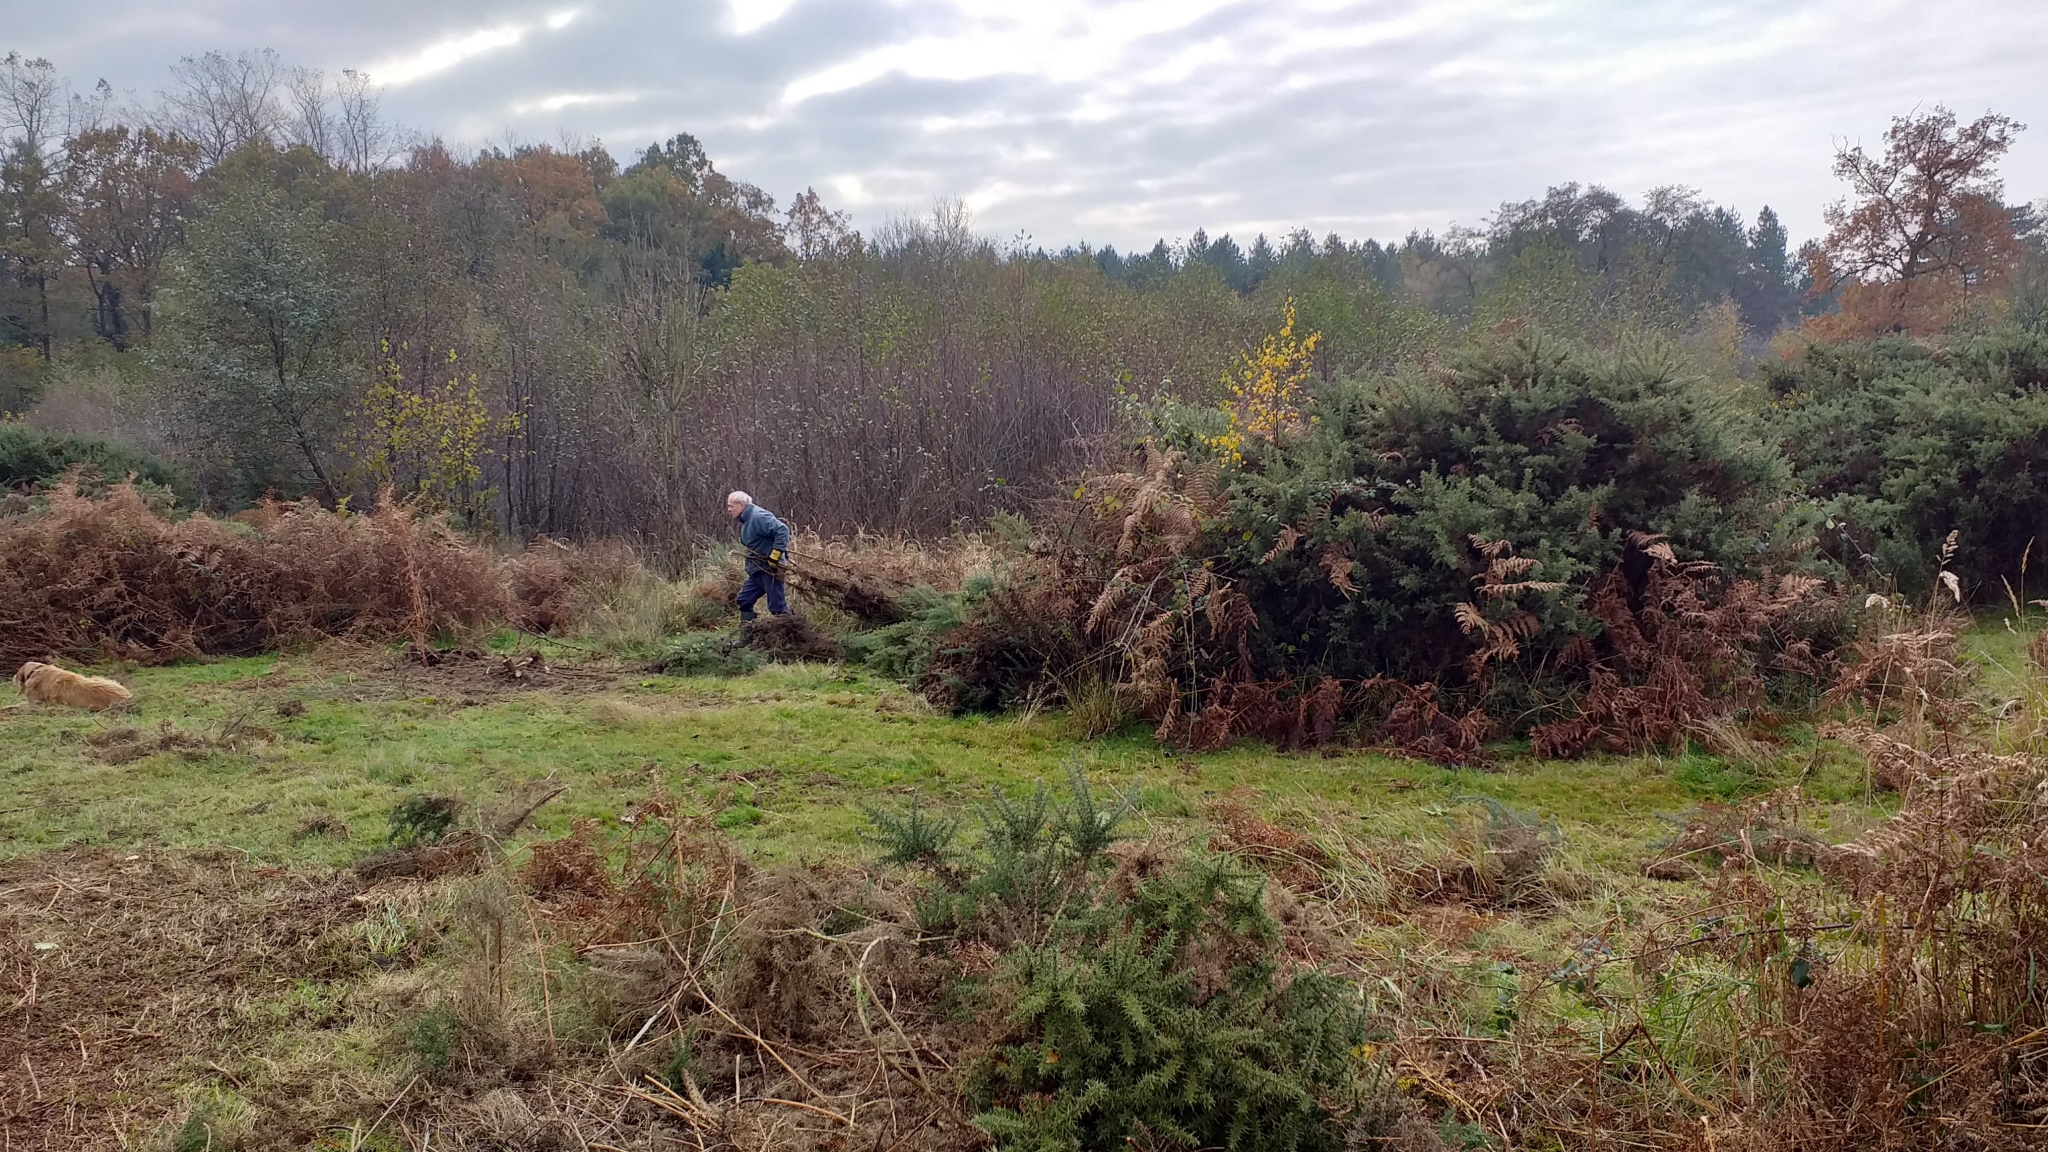 A photo from the FoTF Conservation Event - November 2019 - Gorse Clearance at Hockham Hills & Holes : A volunteer drags Gorse branches